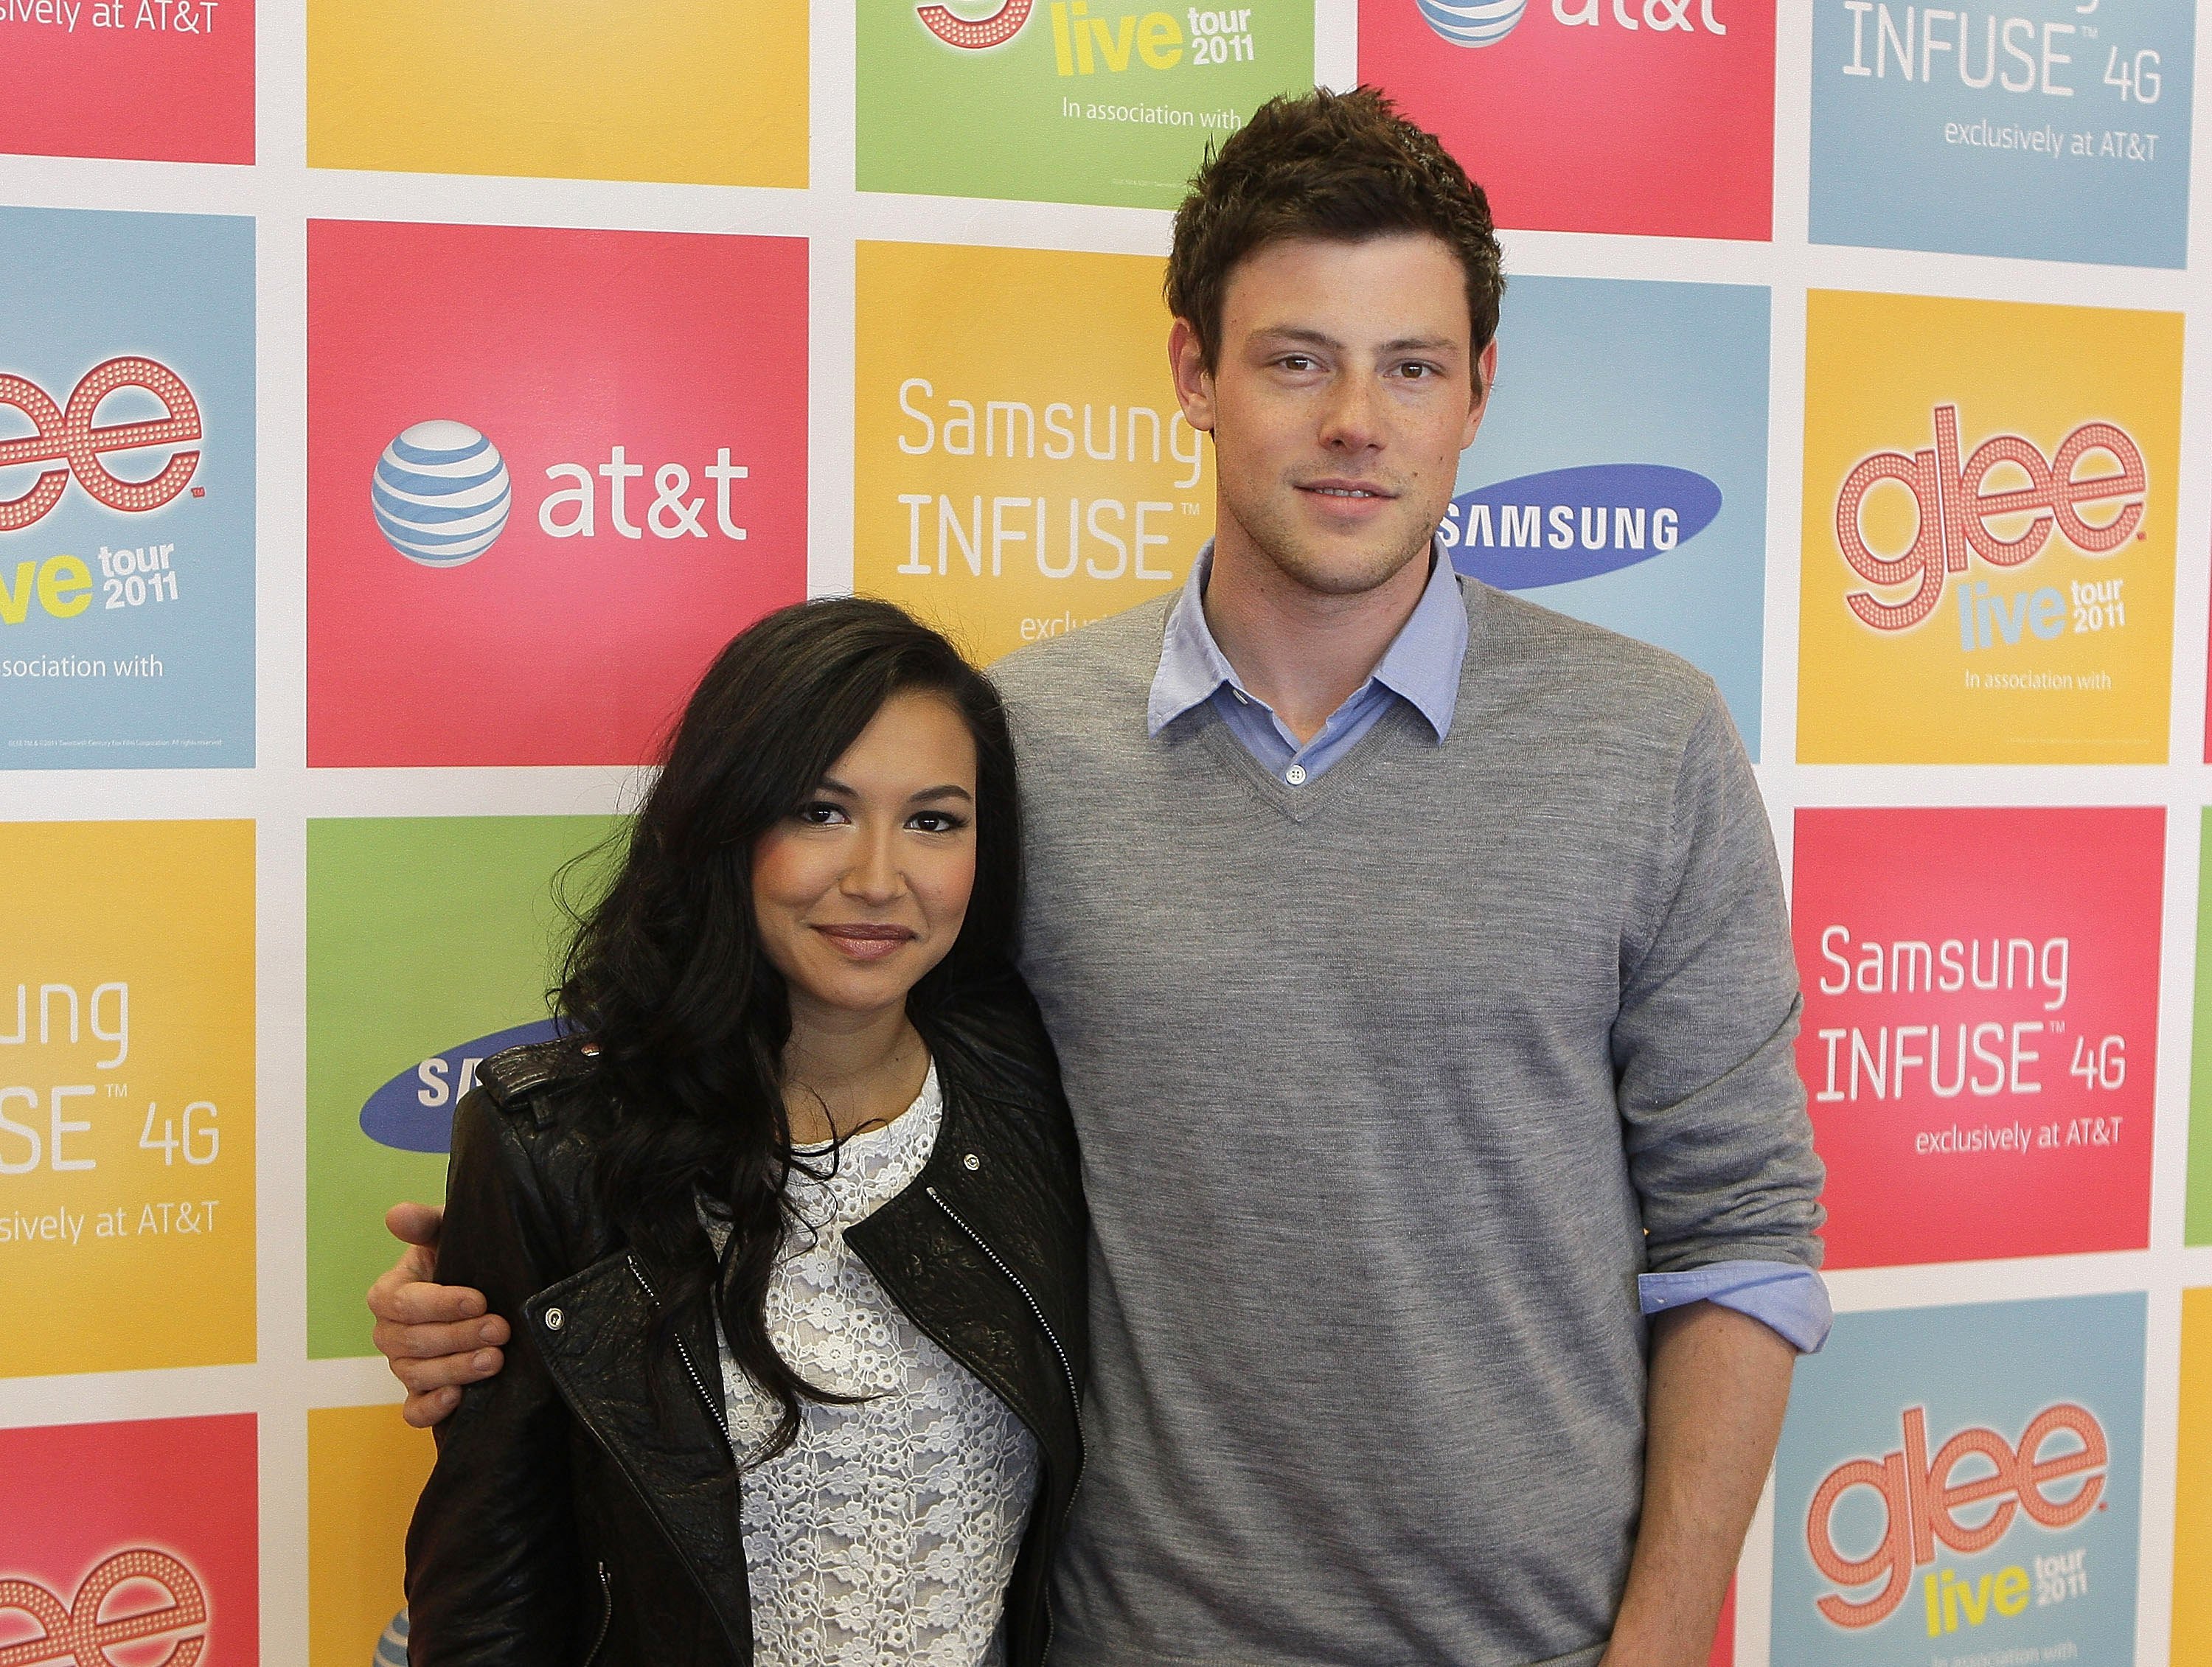 Naya Rivera and Cory Monteith during a 2011 meet and greet event in San Jose. | Photo: Getty Images